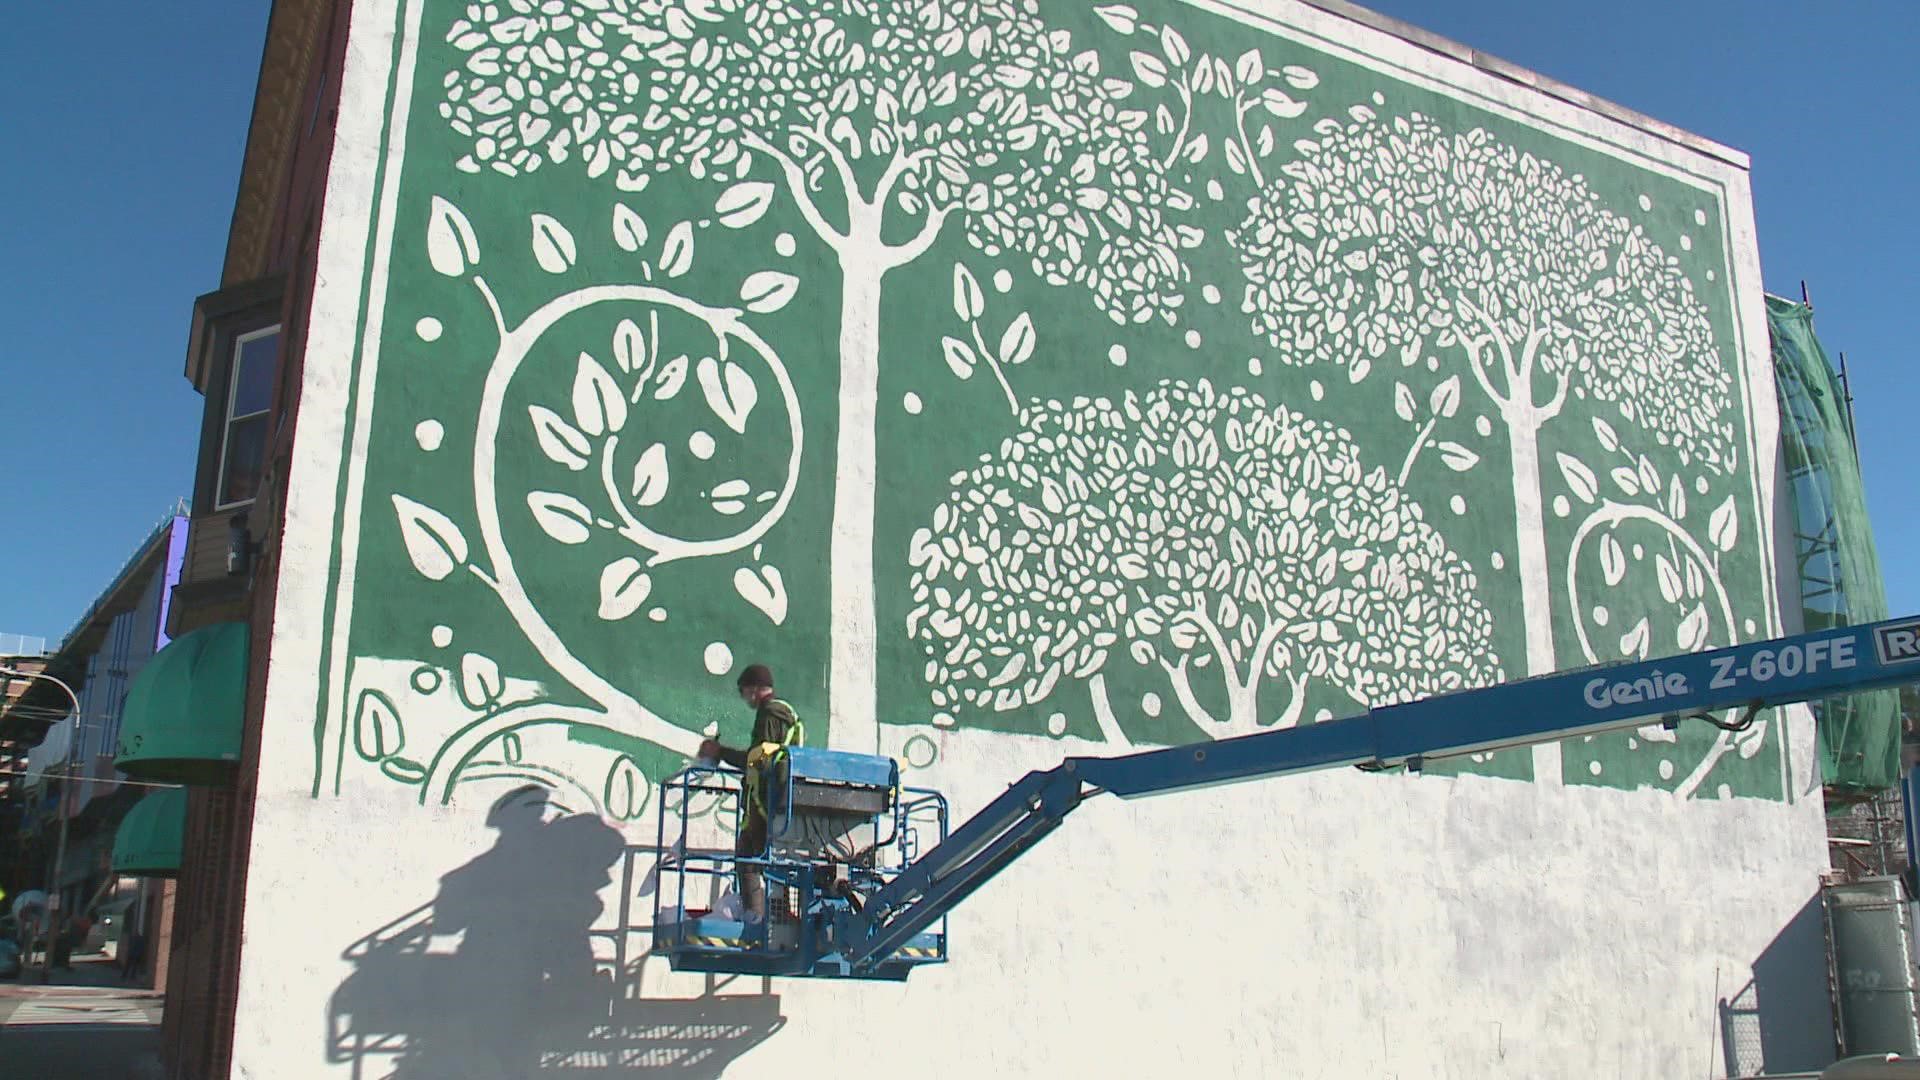 Portland artist Pat Corrigan was hired to paint the new mural, based on a British 19th century book cover.